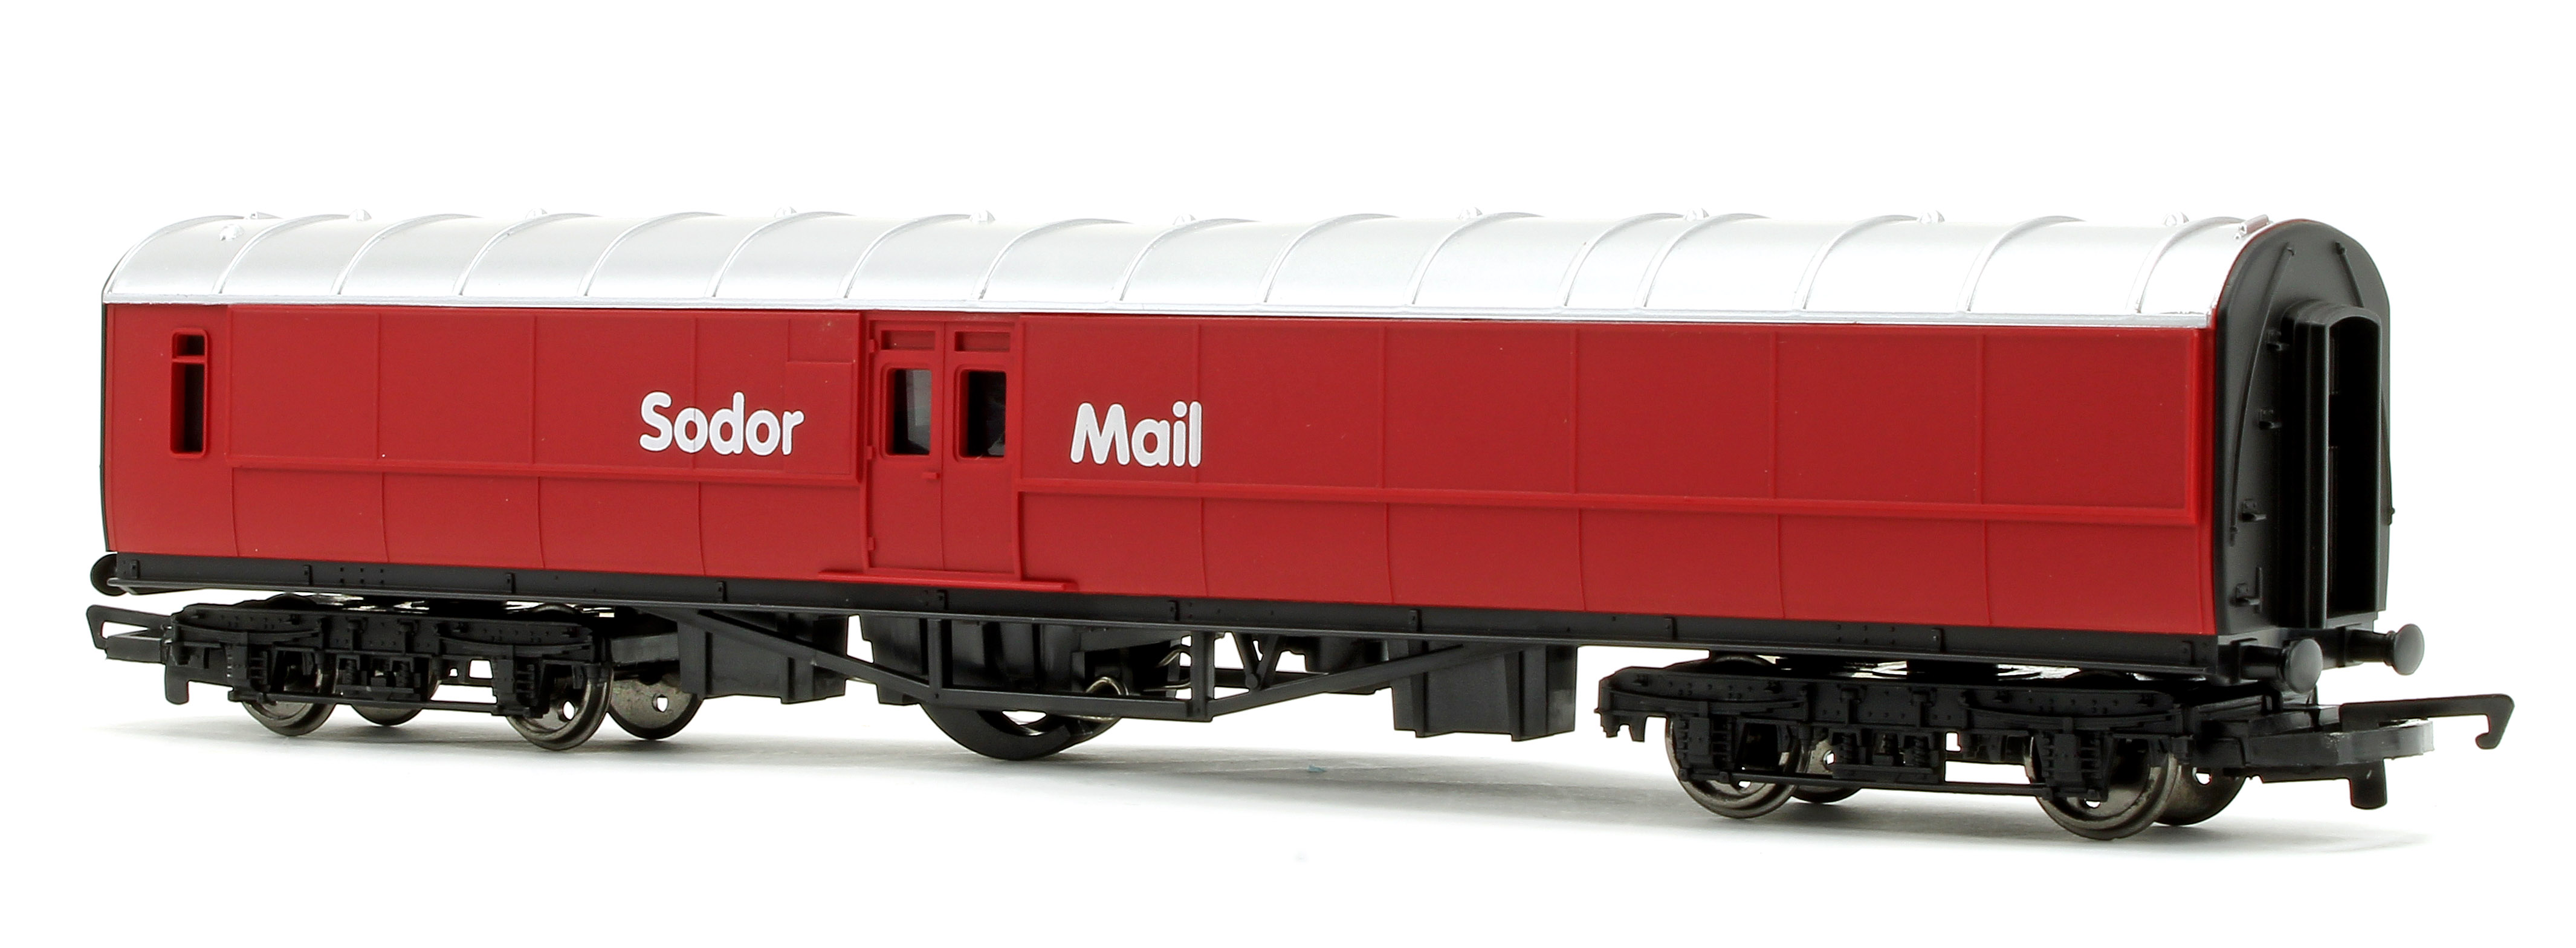 percy and the mail train set